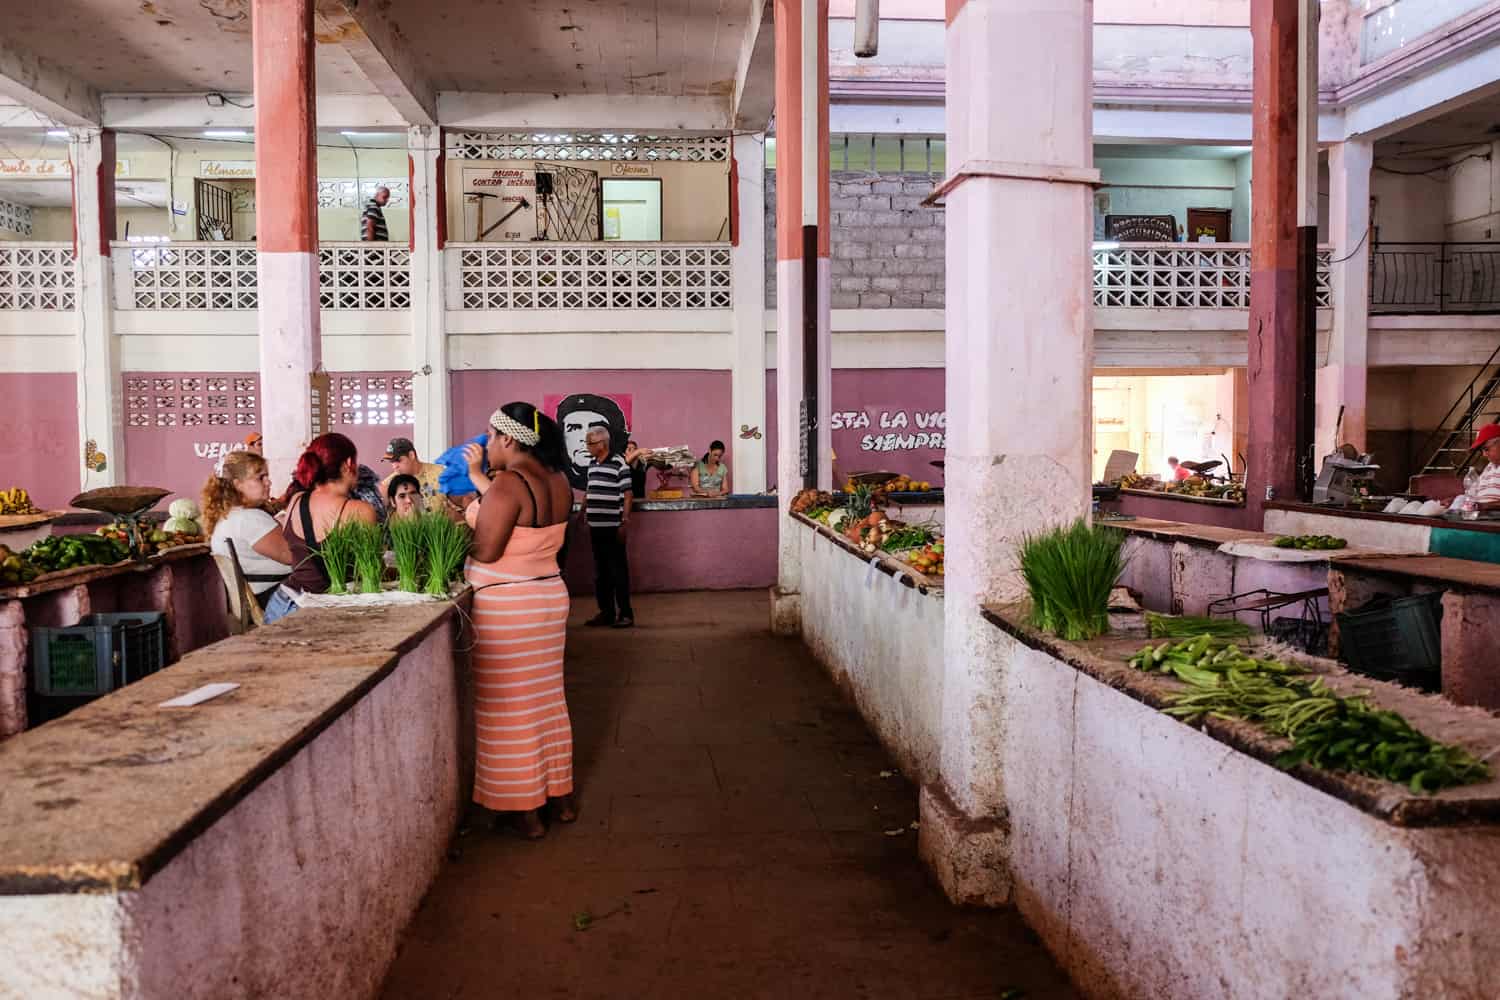 People in a pink painted market place, with a scarce amount of green produce available. 